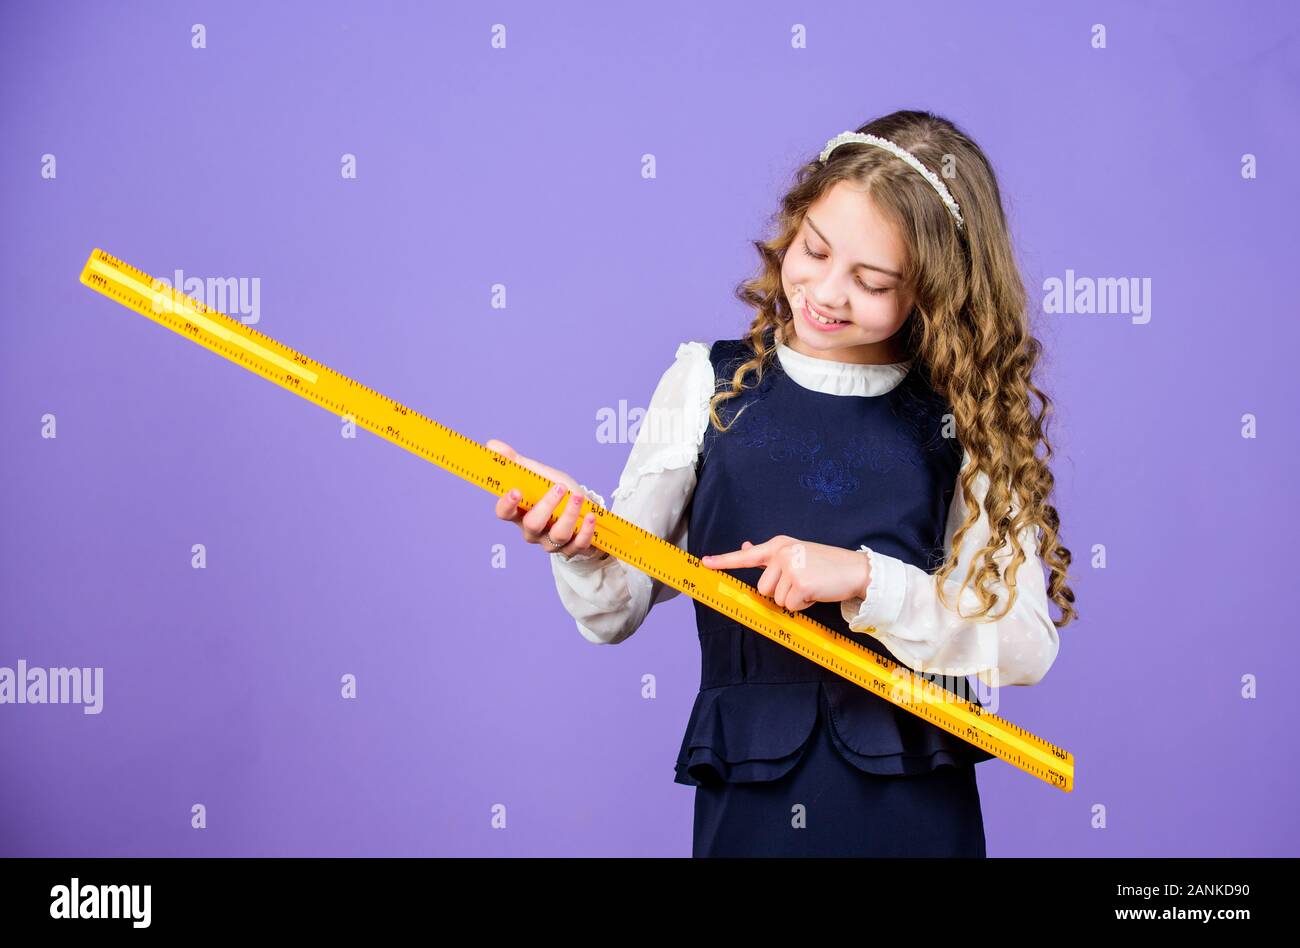 Rullers for mathematics and geometry in school Stock Photo by ©alexcrysman  68325263